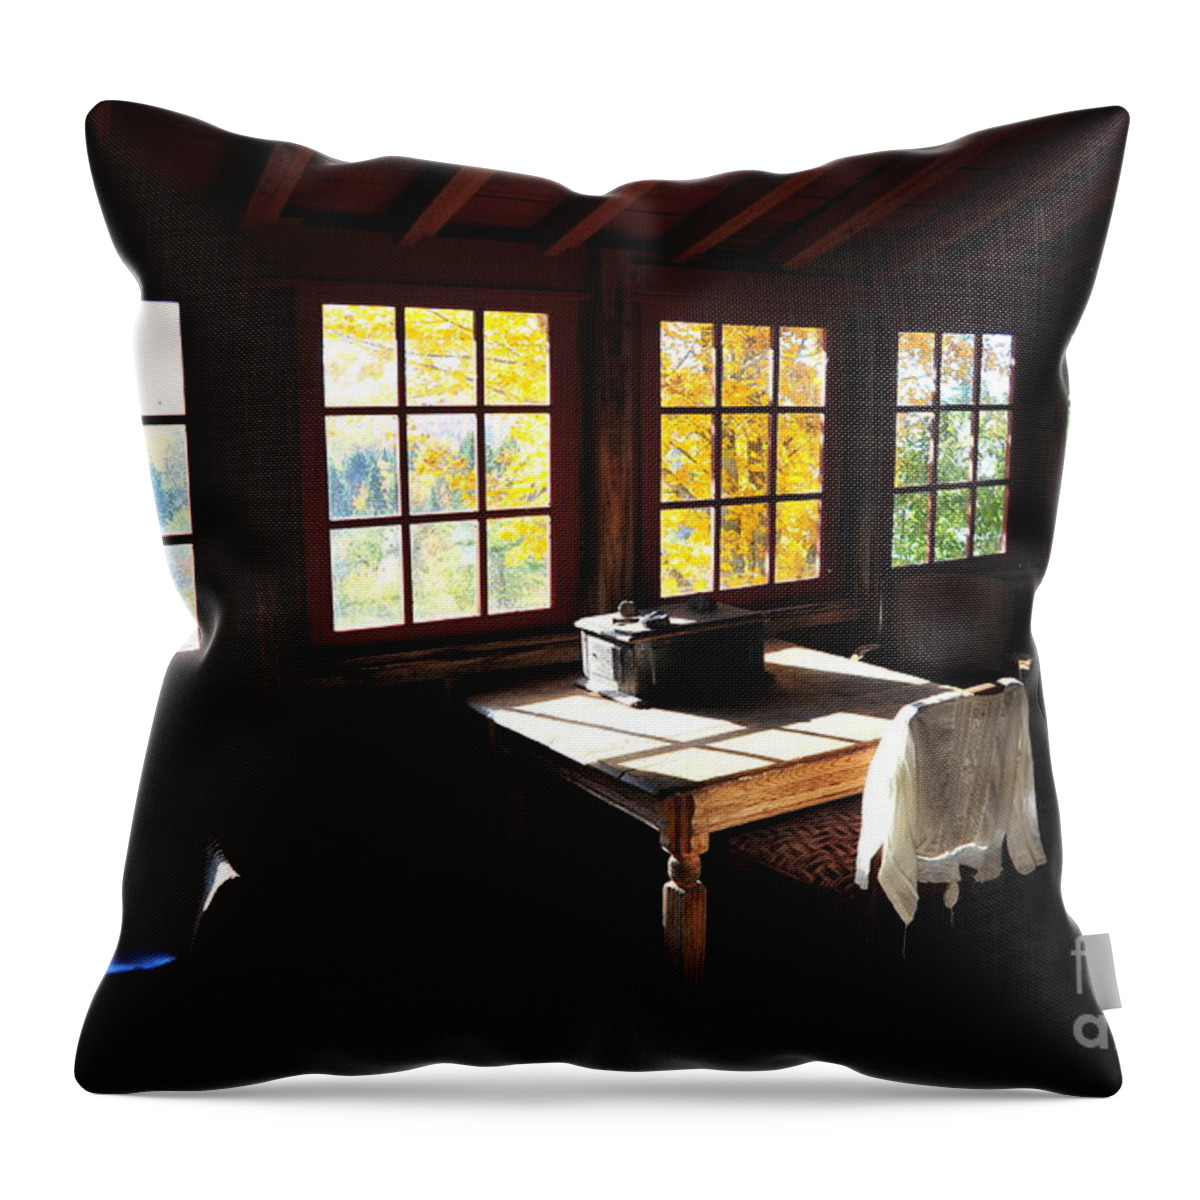 Antique Throw Pillow featuring the photograph A Room With A View by Terri Gostola